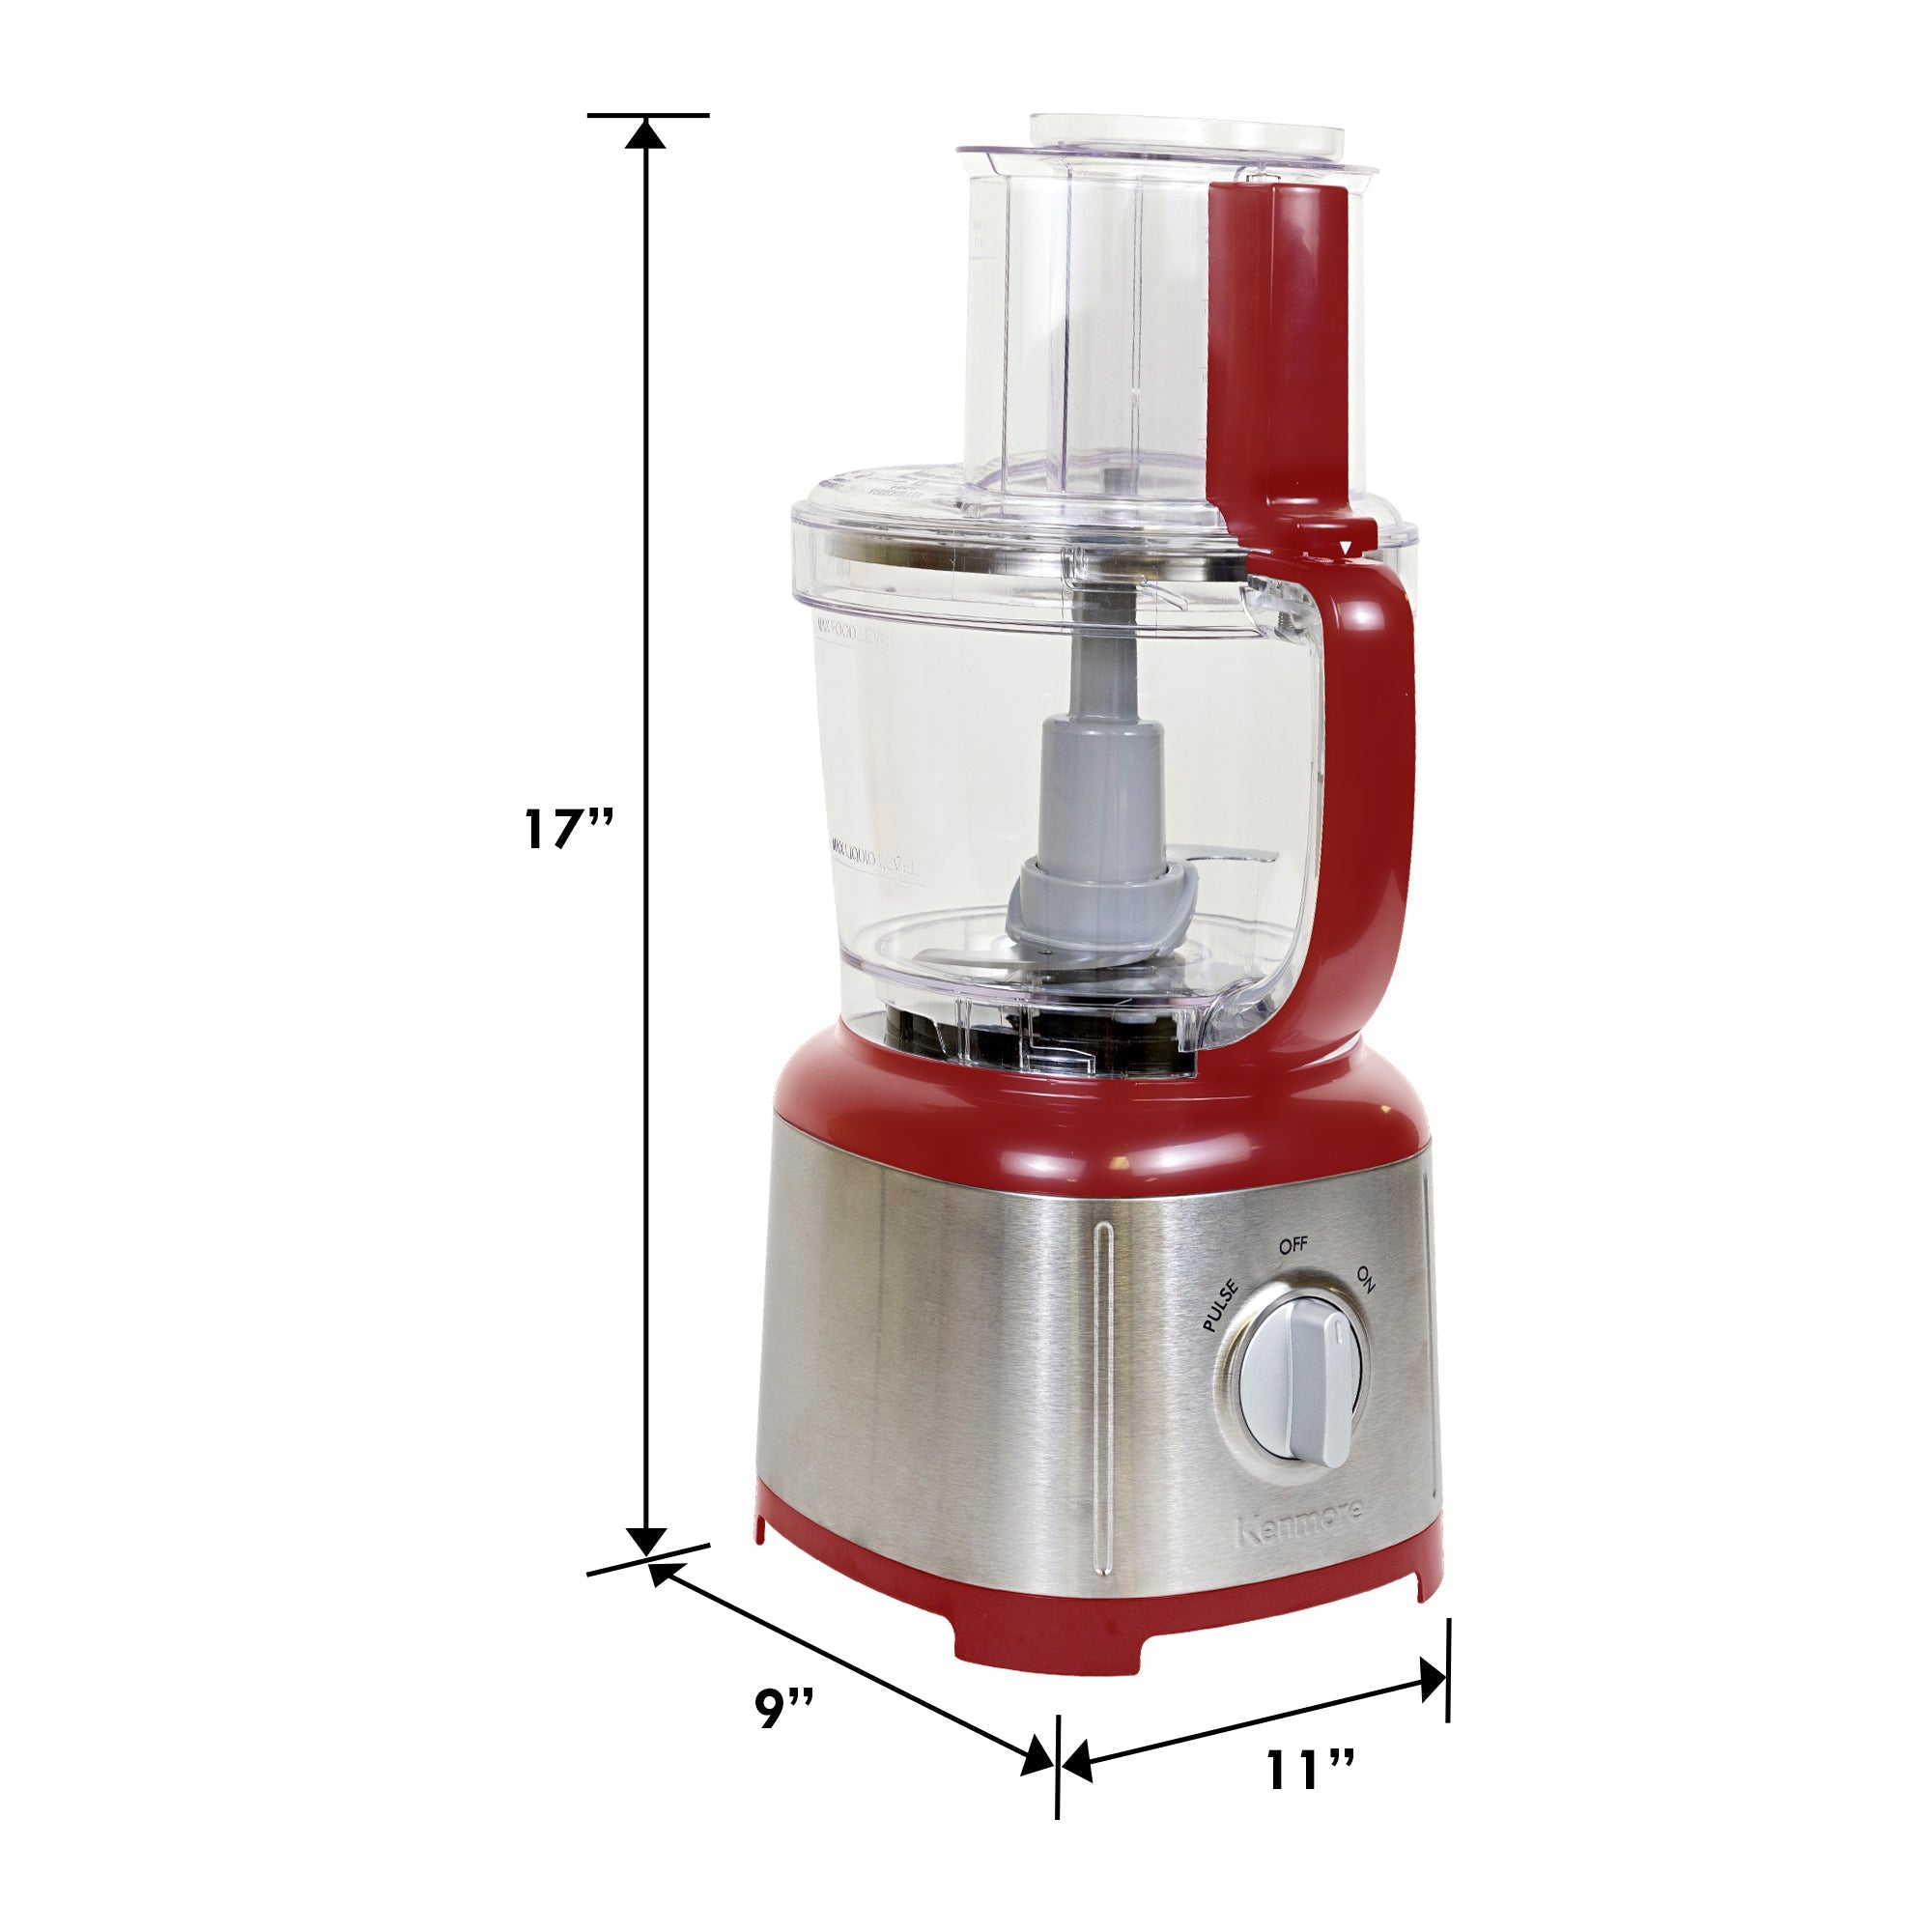 Kenmore 11 cup food processor and vegetable chopper on a white background with dimensions labeled